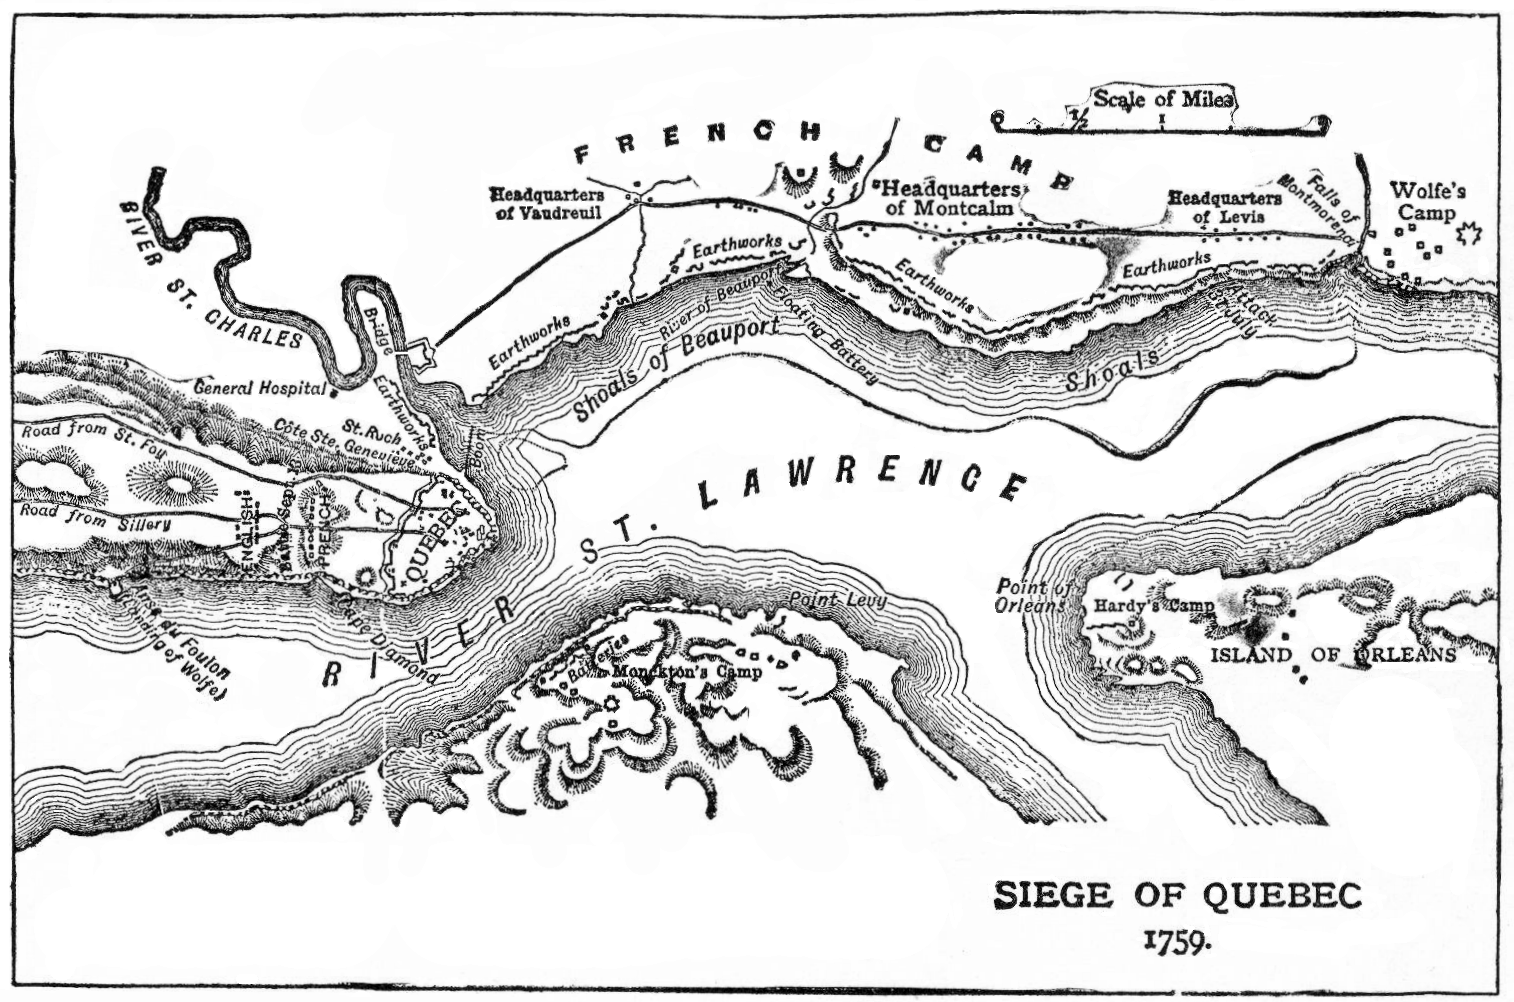 The fortress of Quebec sits on a piece of land jutting into the St. Lawrence River.